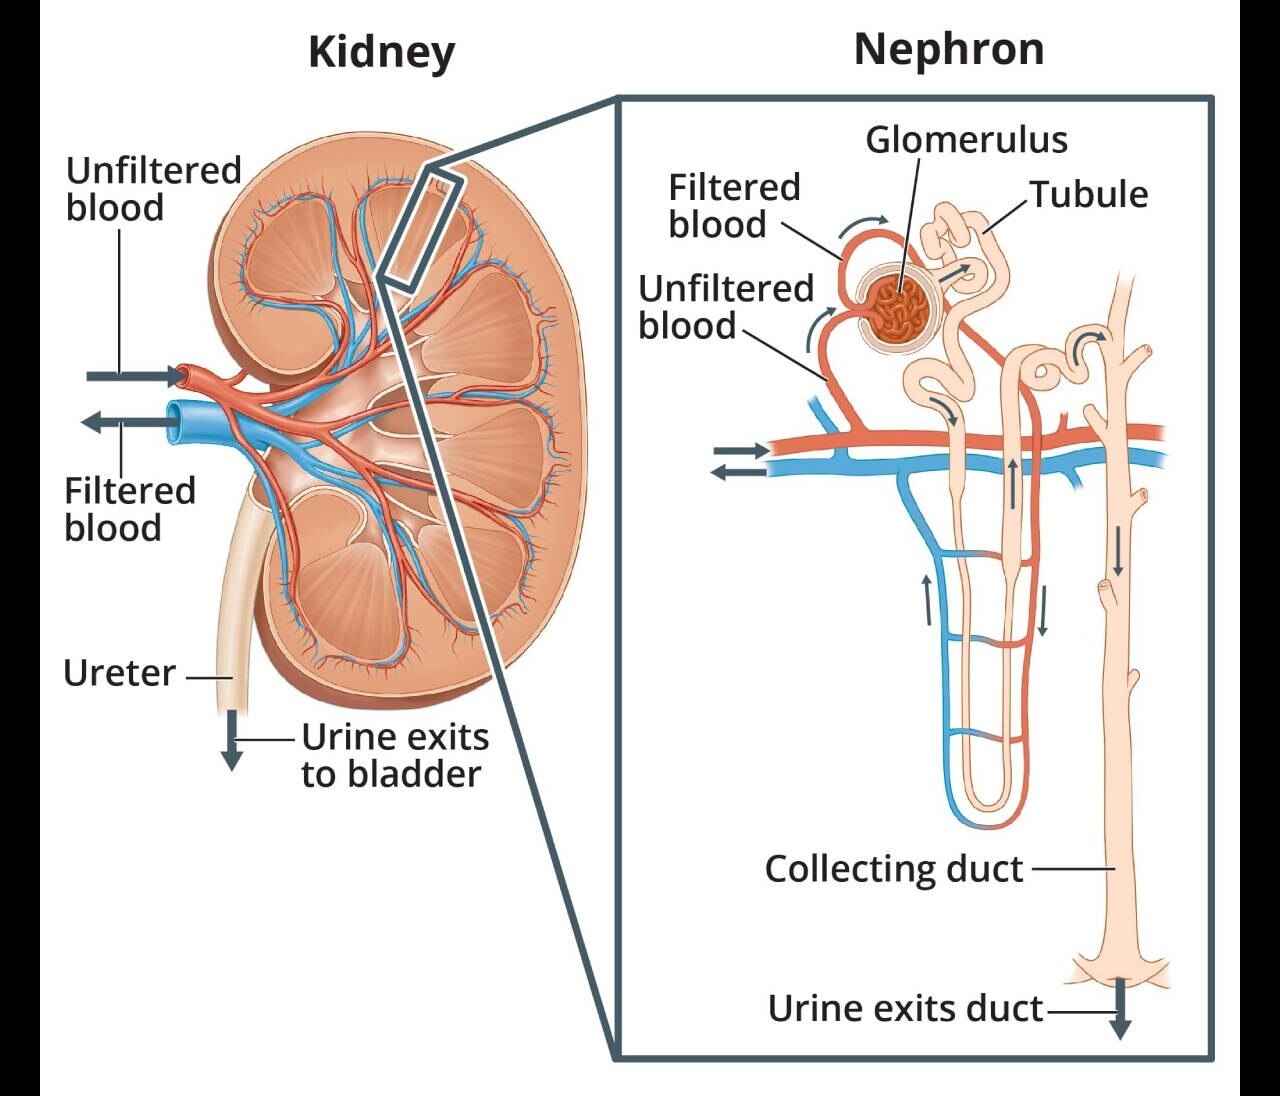 Alt-text: Two illustrations. A human kidney, with arrows showing where unfiltered blood enters the kidney and filtered blood leaves the kidney. Wastes and extra water leave the kidney through the ureter to the bladder as urine. An inset image shows a microscopic view of a nephron, one of the tiny units in the kidney that filters the blood. Arrows show the path unfiltered blood takes into the glomerulus, which filters it. Arrows also show how waste leaves the glomerulus via the tubule, which takes it to the collecting duct. The collecting duct collects the extra waste and water that leave the body as urine. Labels point to the unfiltered blood, filtered blood, glomerulus, tubule, and collecting duct